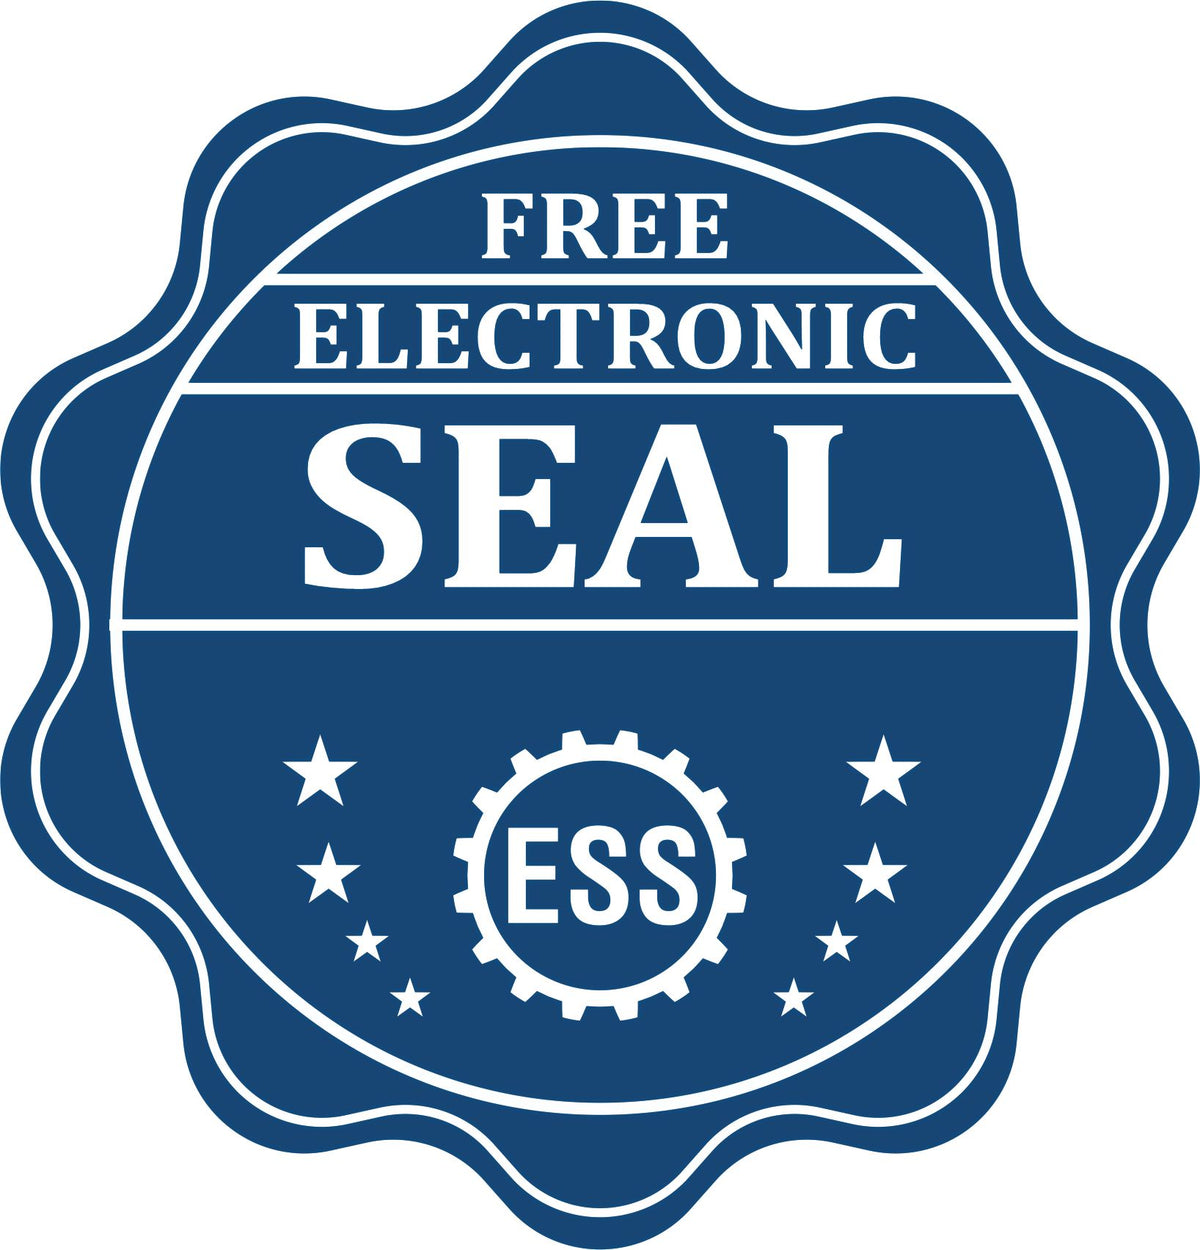 A badge showing a free electronic seal for the Gift Indiana Engineer Seal with stars and the ESS gear on the emblem.